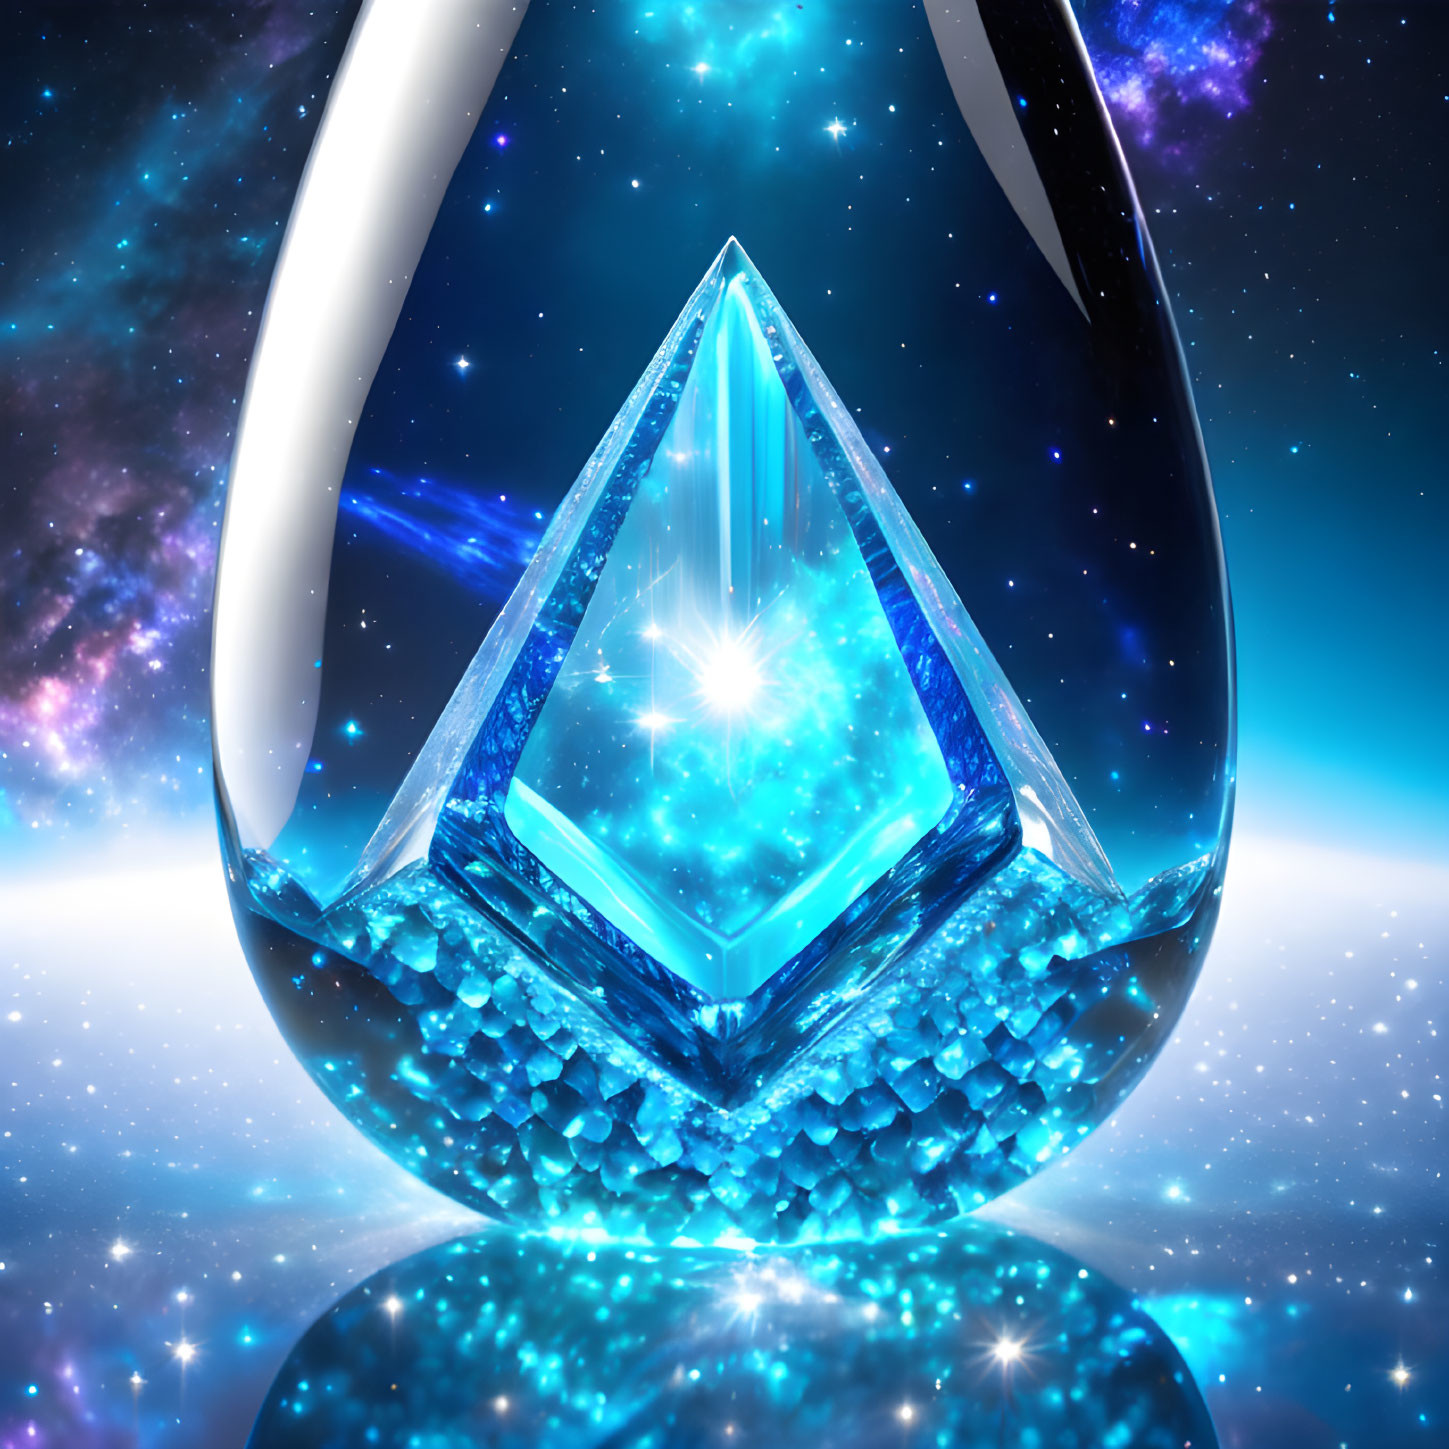 Luminous blue crystal embraced by silky white bands on cosmic background